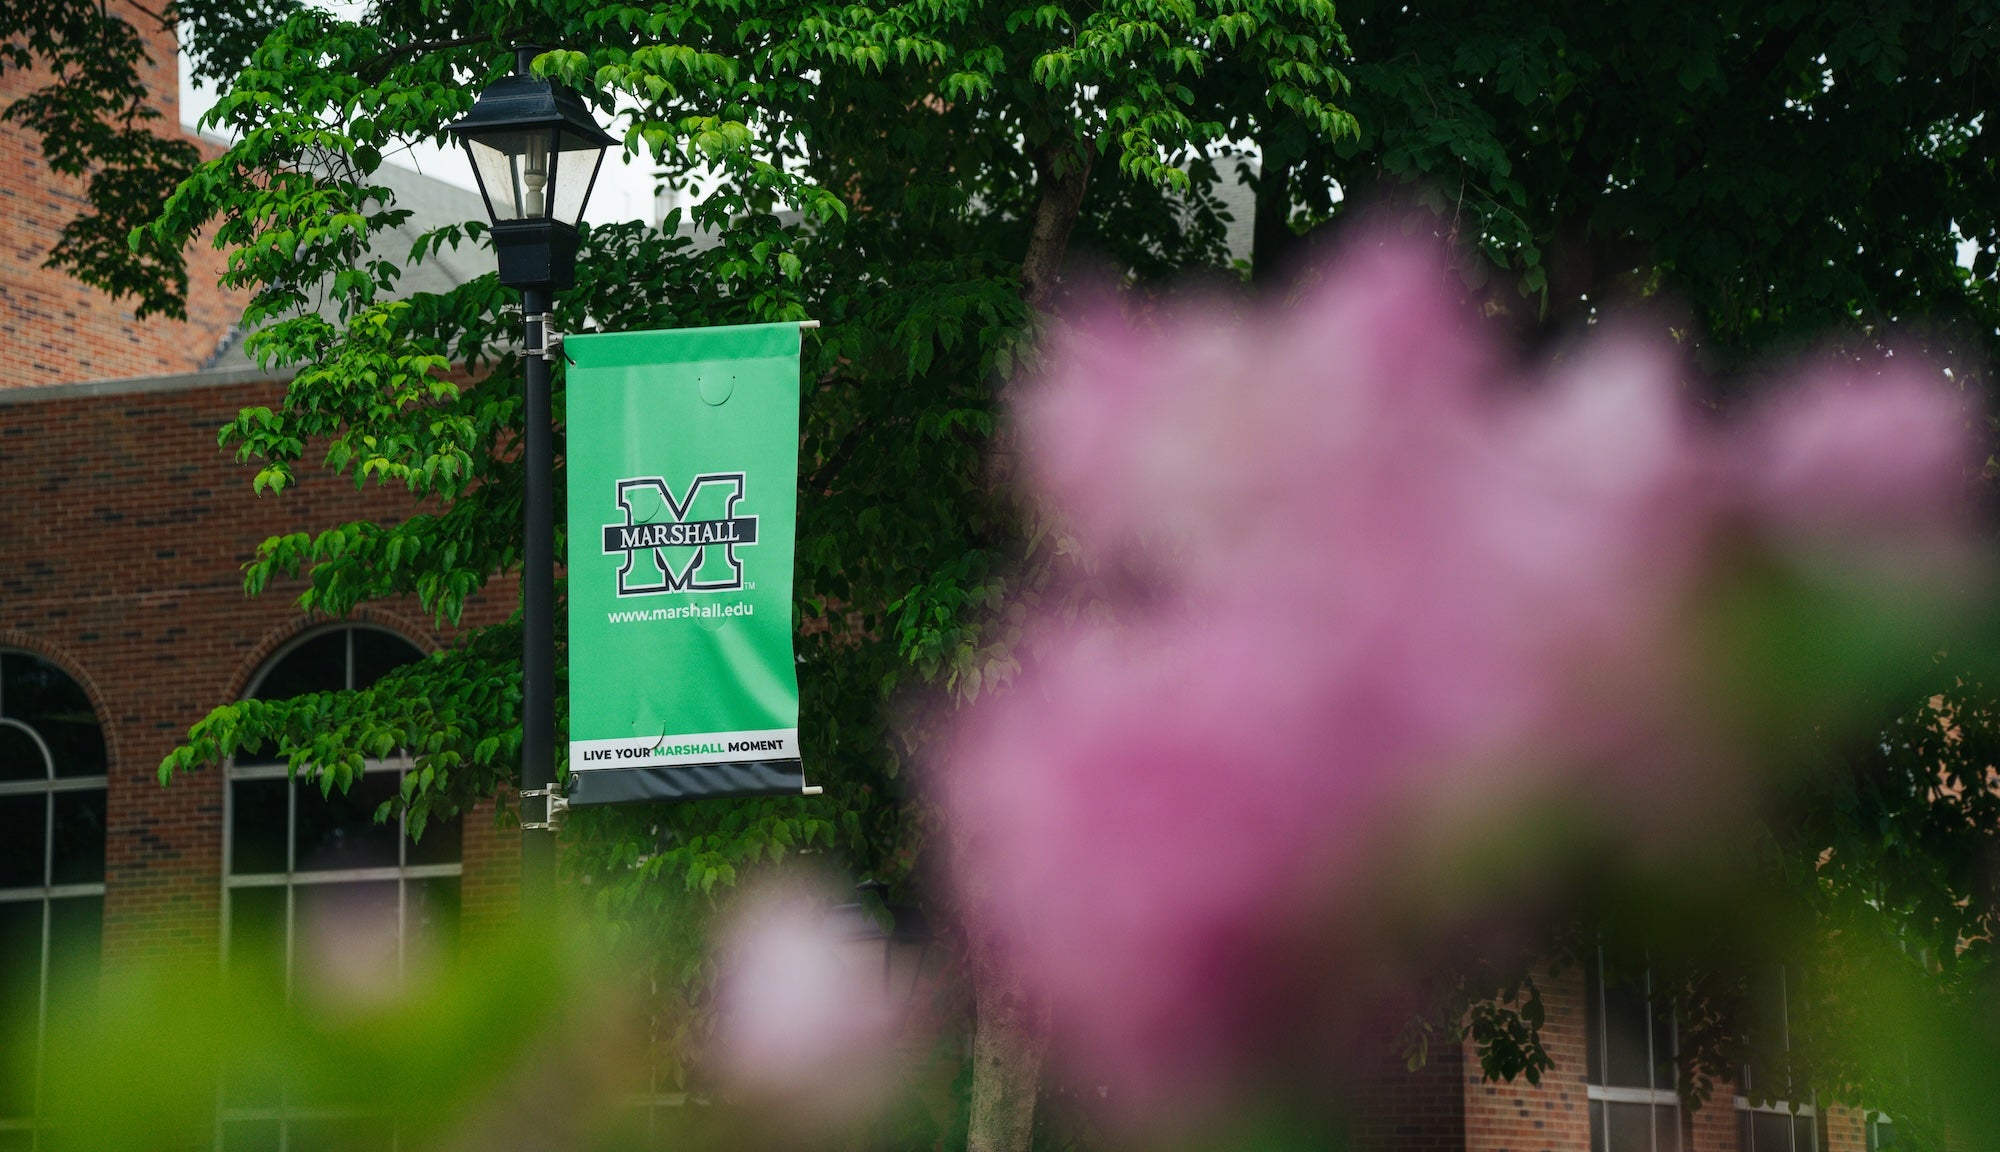 green Marshall banner on campus with pink flowers in foreground